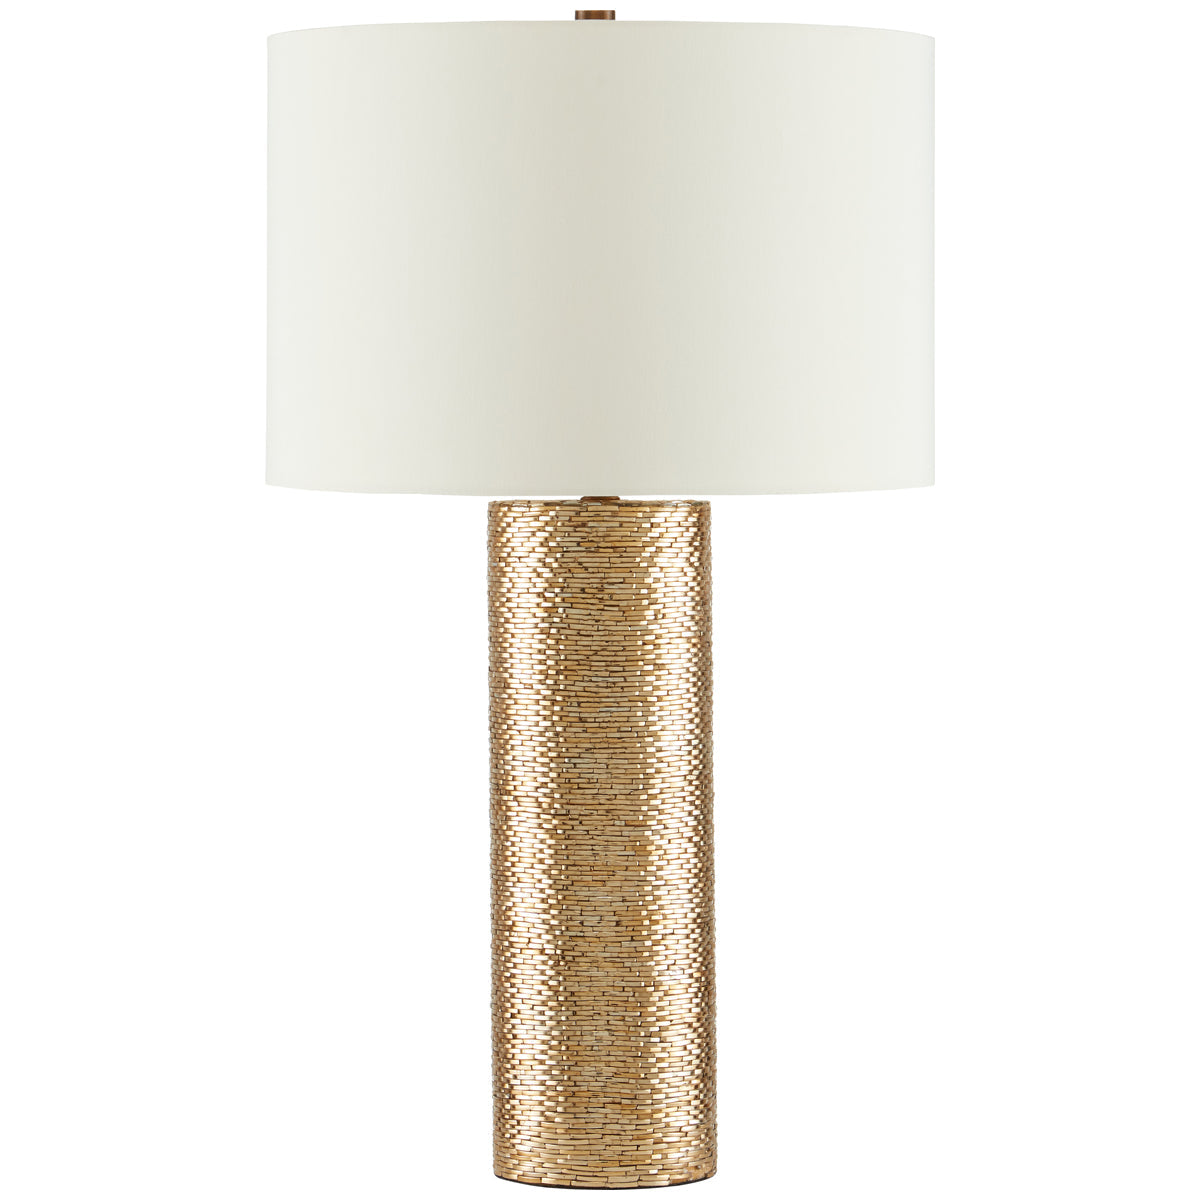 Currey and Company Glimmer Gold Table Lamp